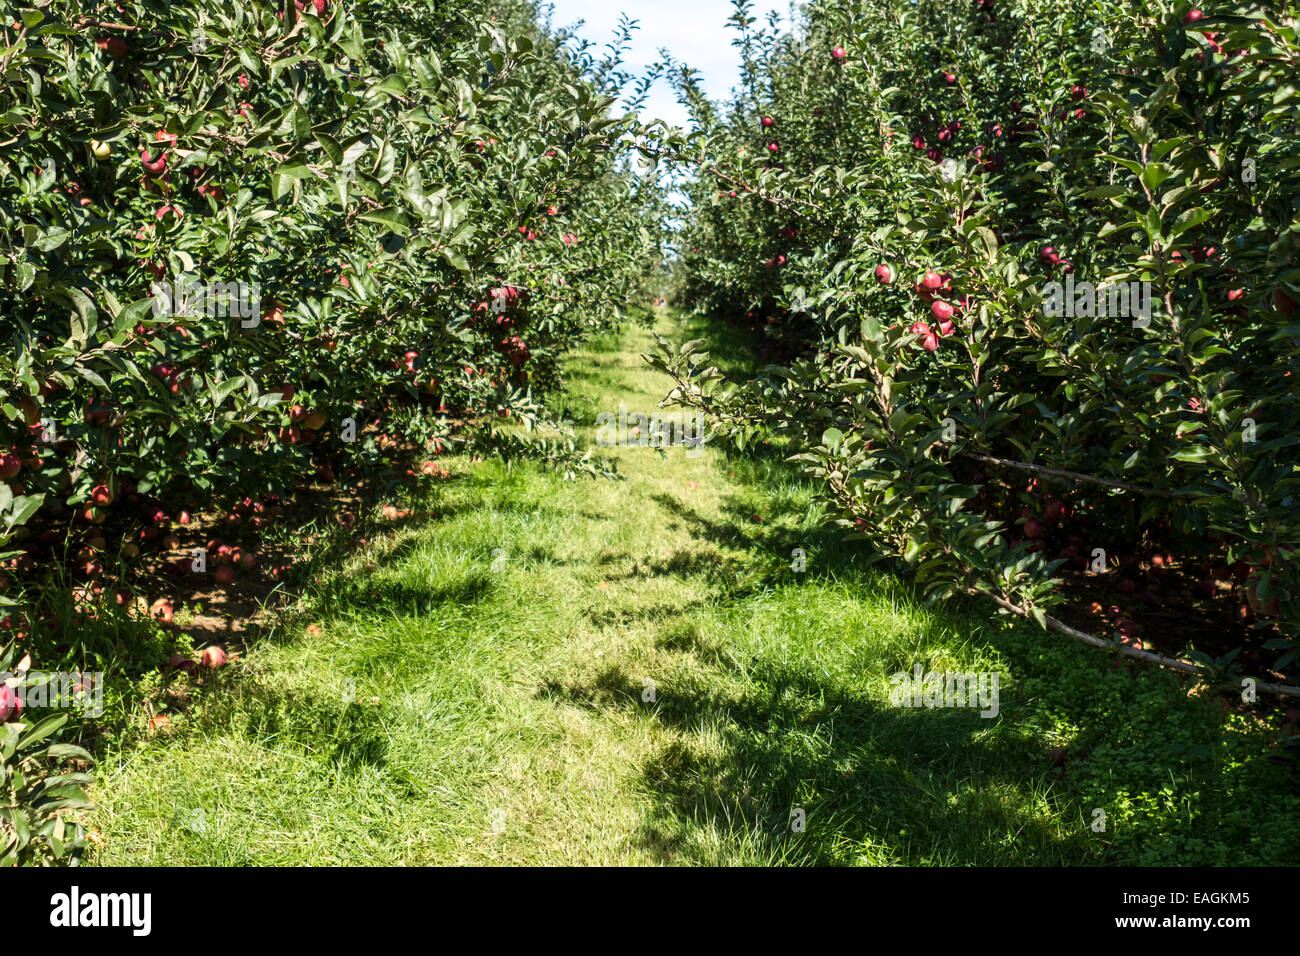 Fresh apples in the apple orchard Stock Photo